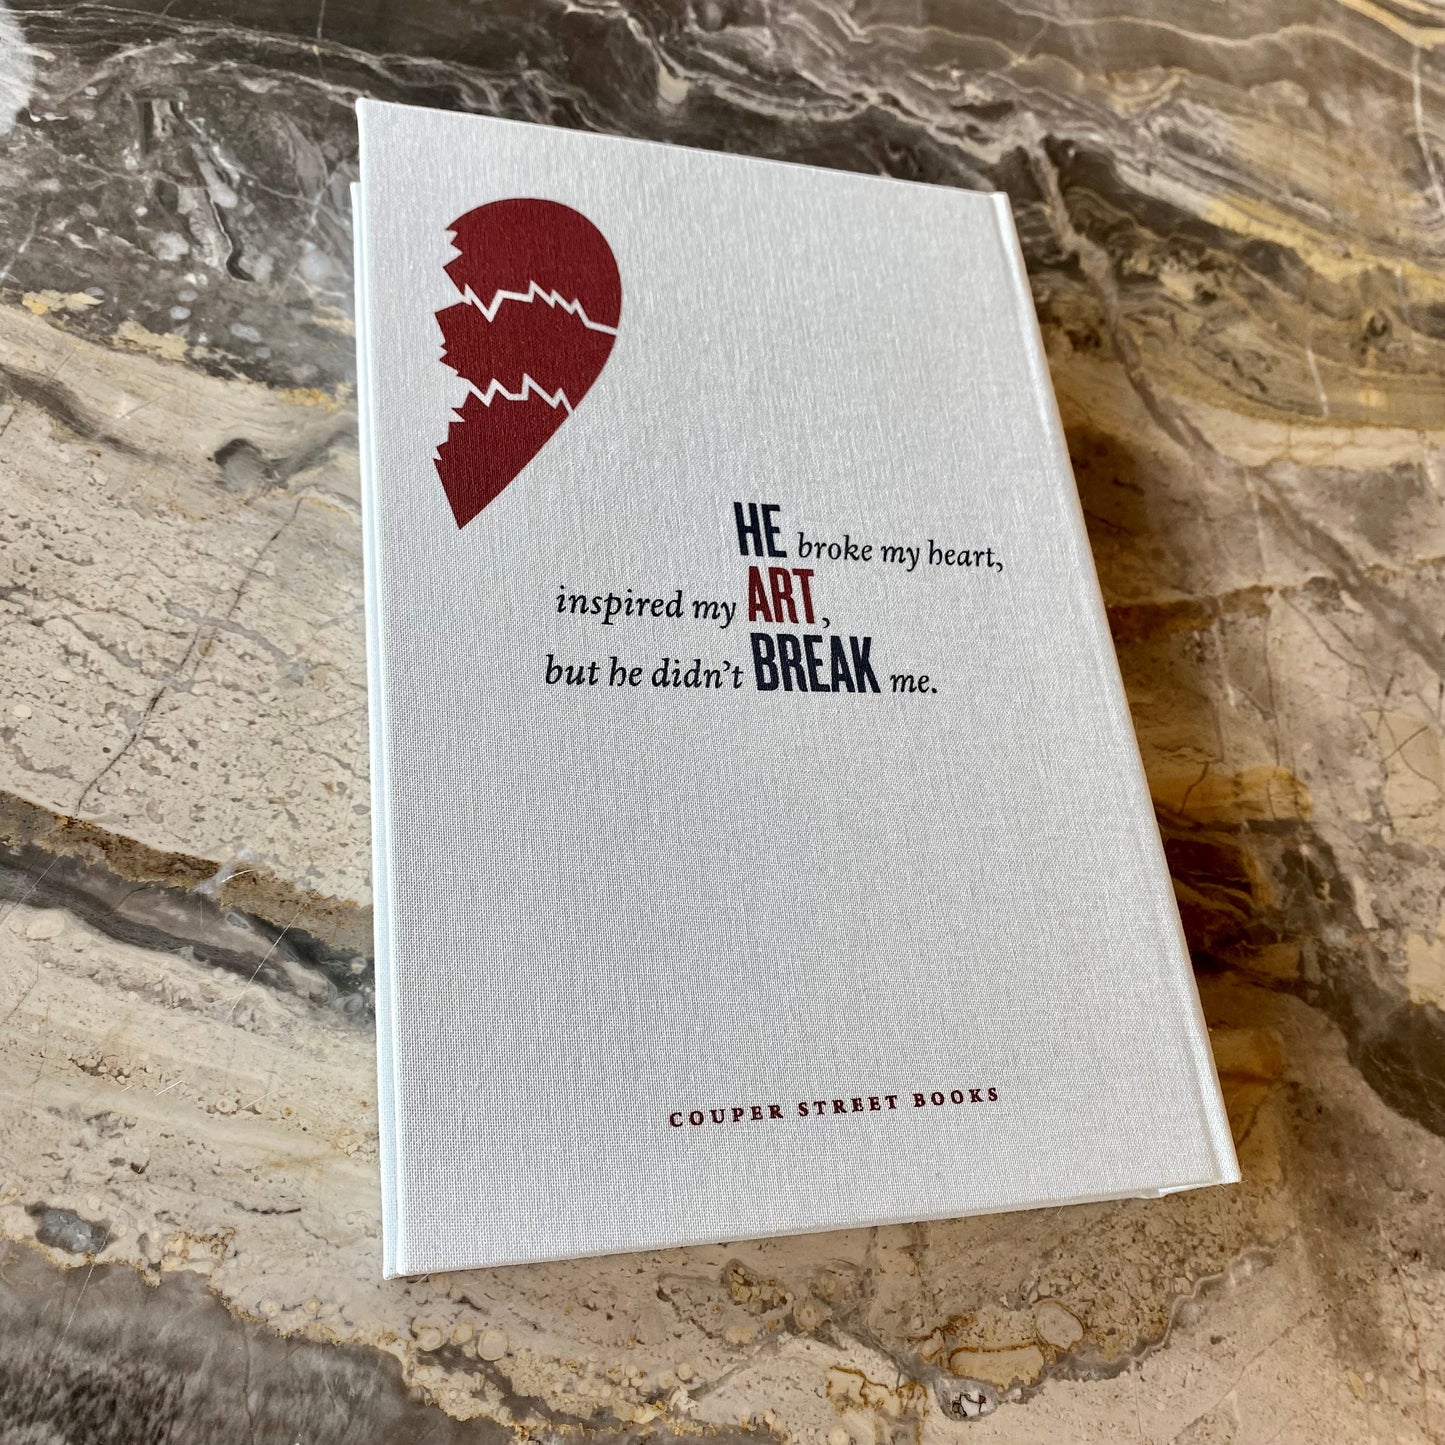 Heartbreak by Rebecca Archer. First edition 100 copies. Signed and numbered by author.